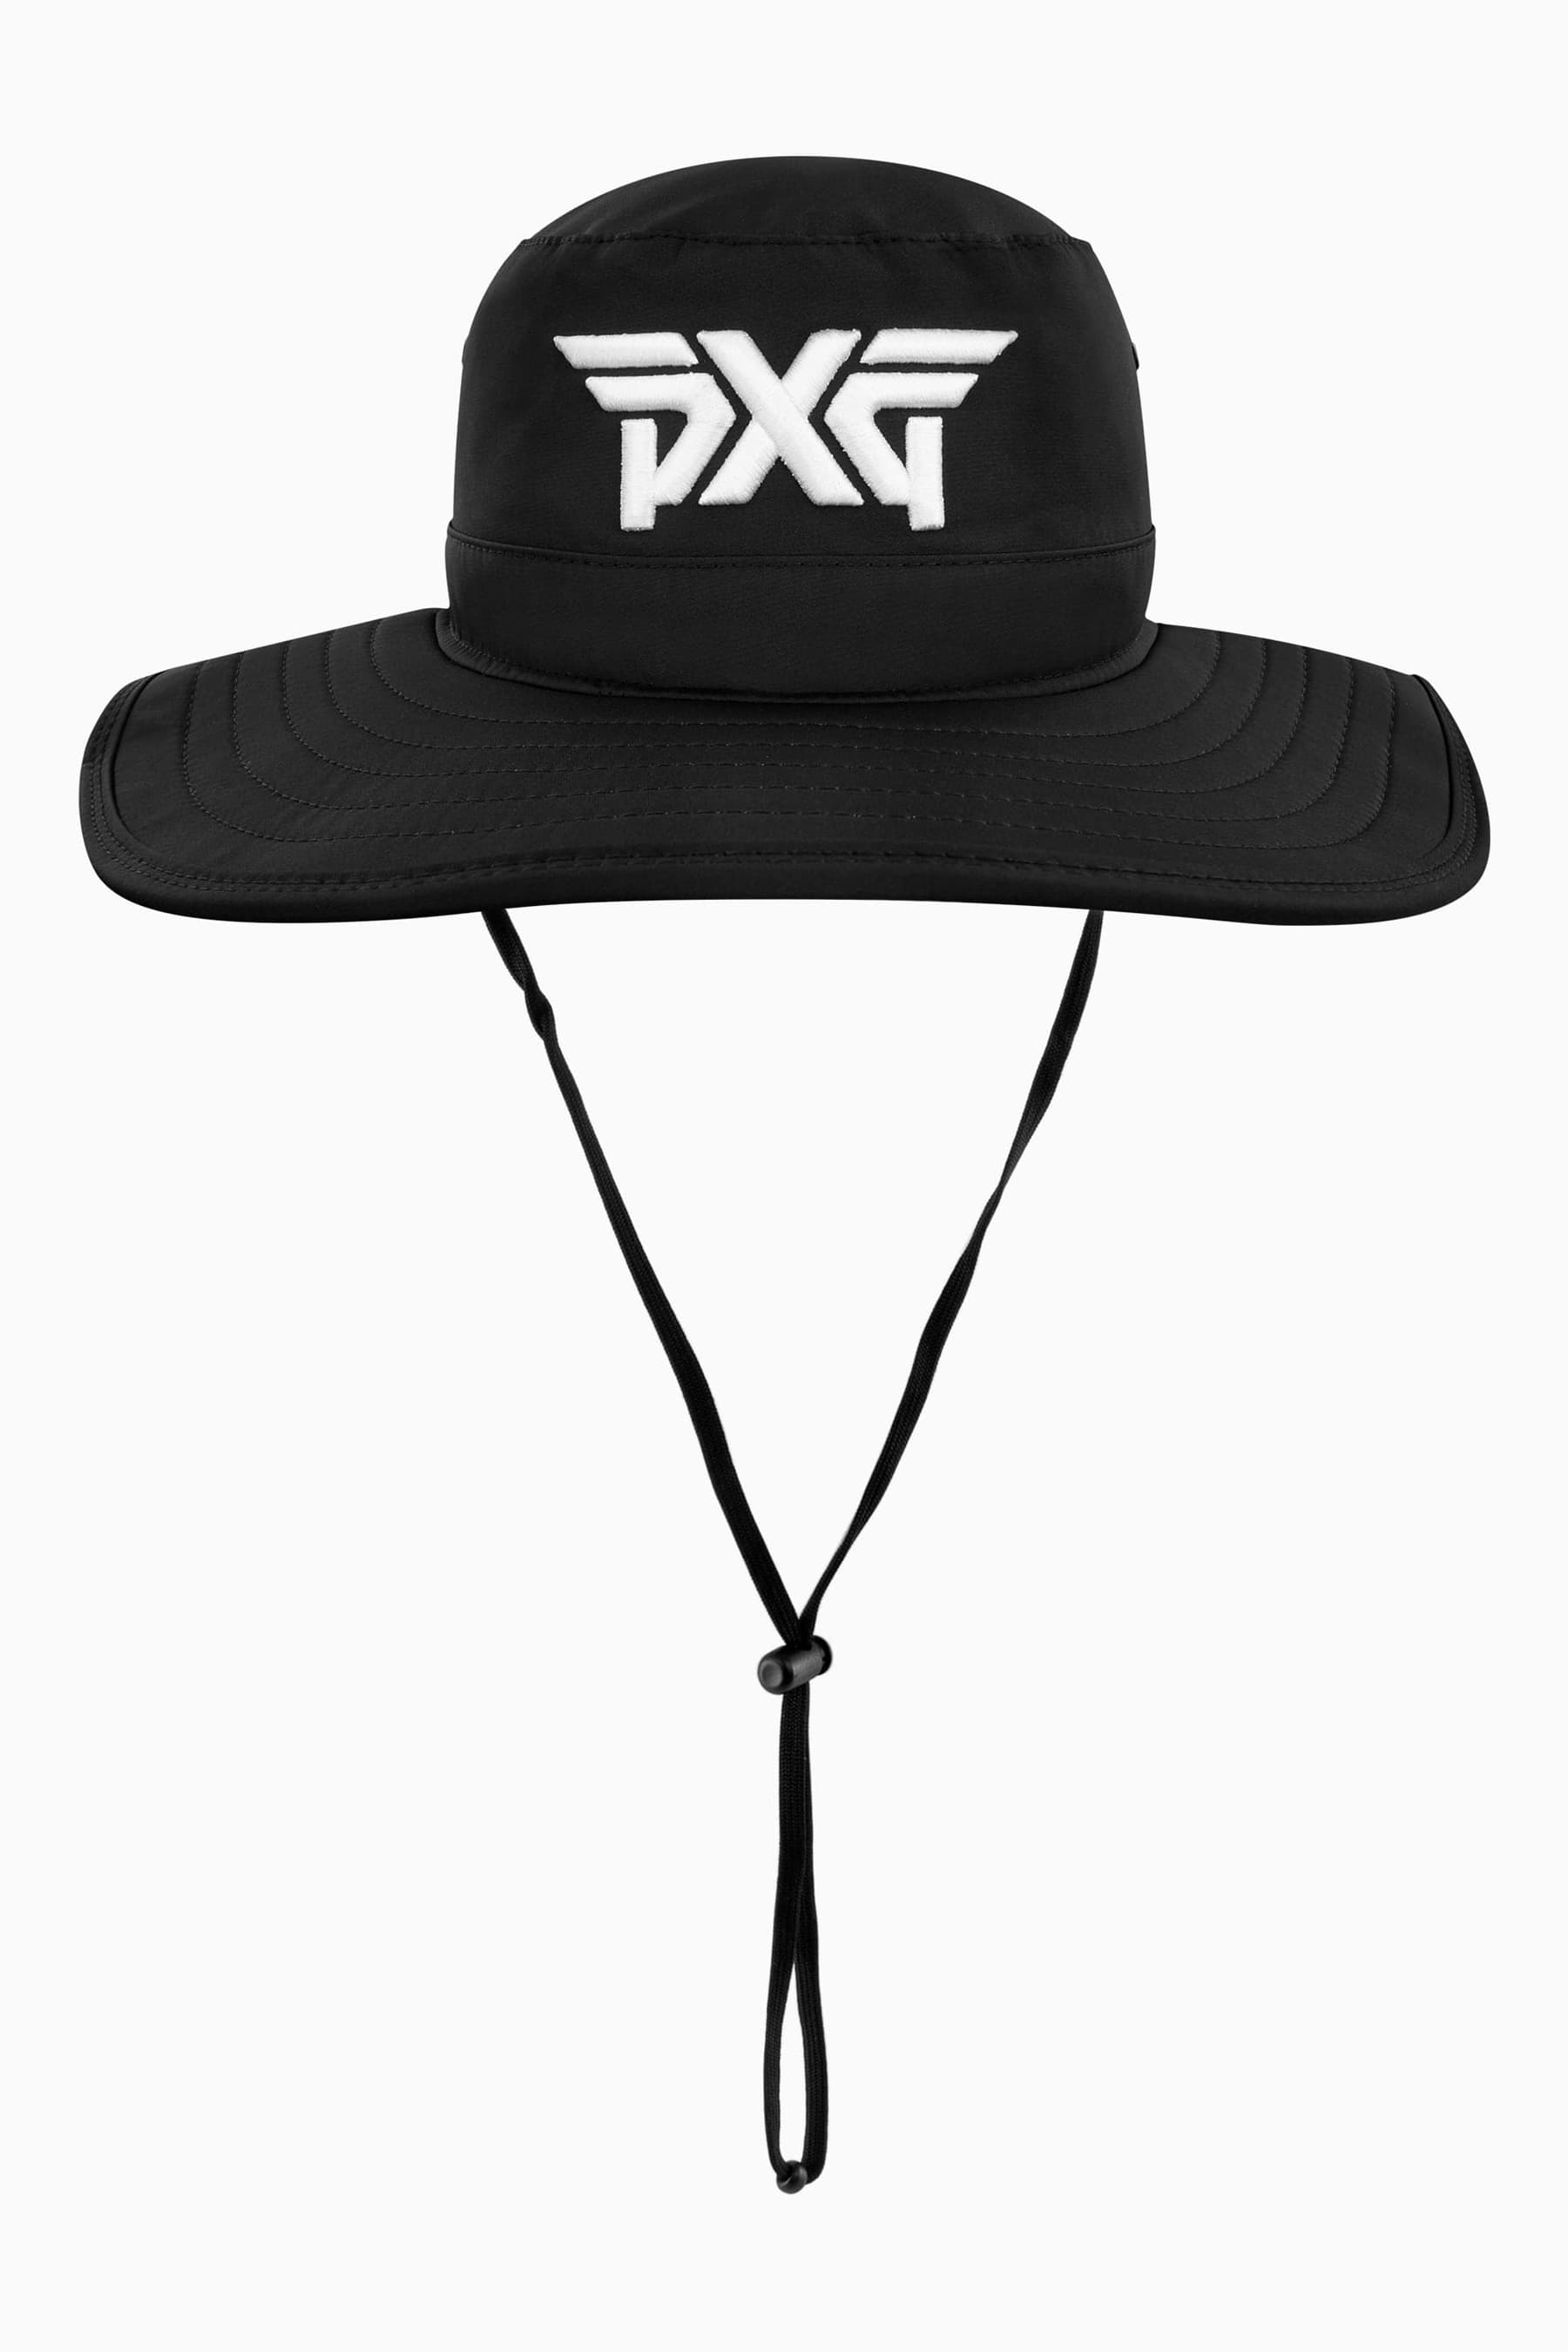 Prolight Bush Hat  Shop the Highest Quality Golf Apparel, Gear,  Accessories and Golf Clubs at PXG